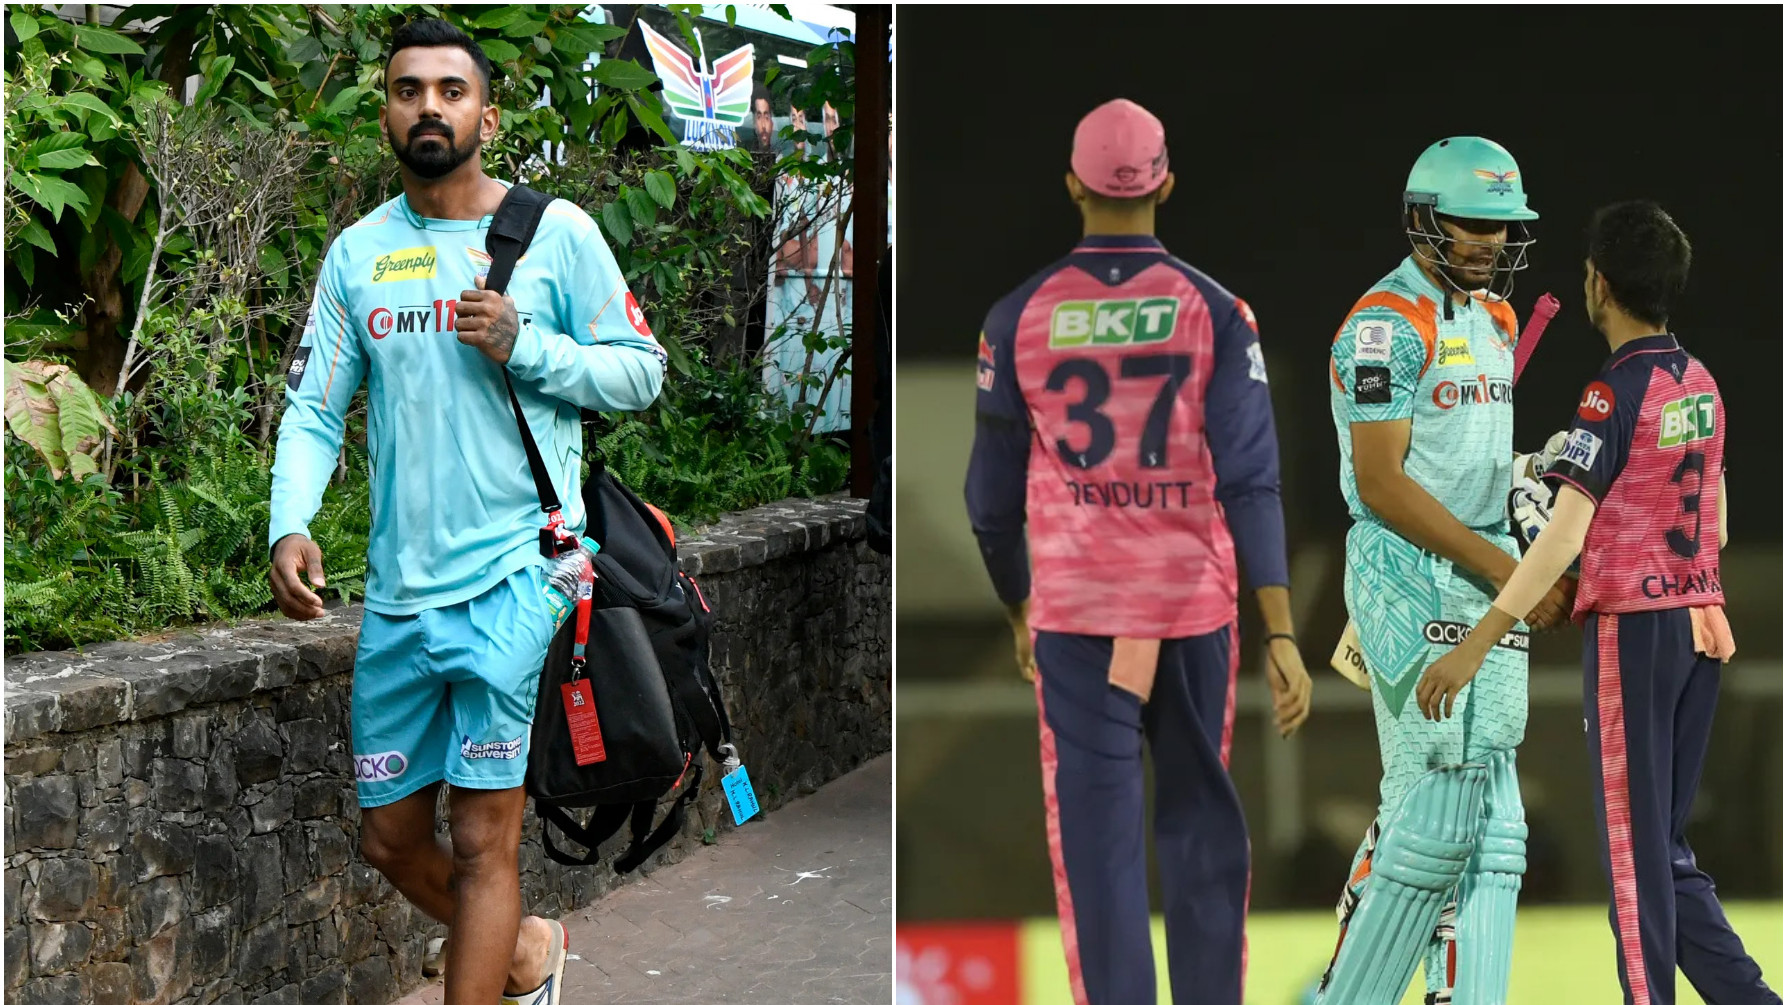 IPL 2022: “We have to go back and get better”, says KL Rahul after LSG’s loss to RR